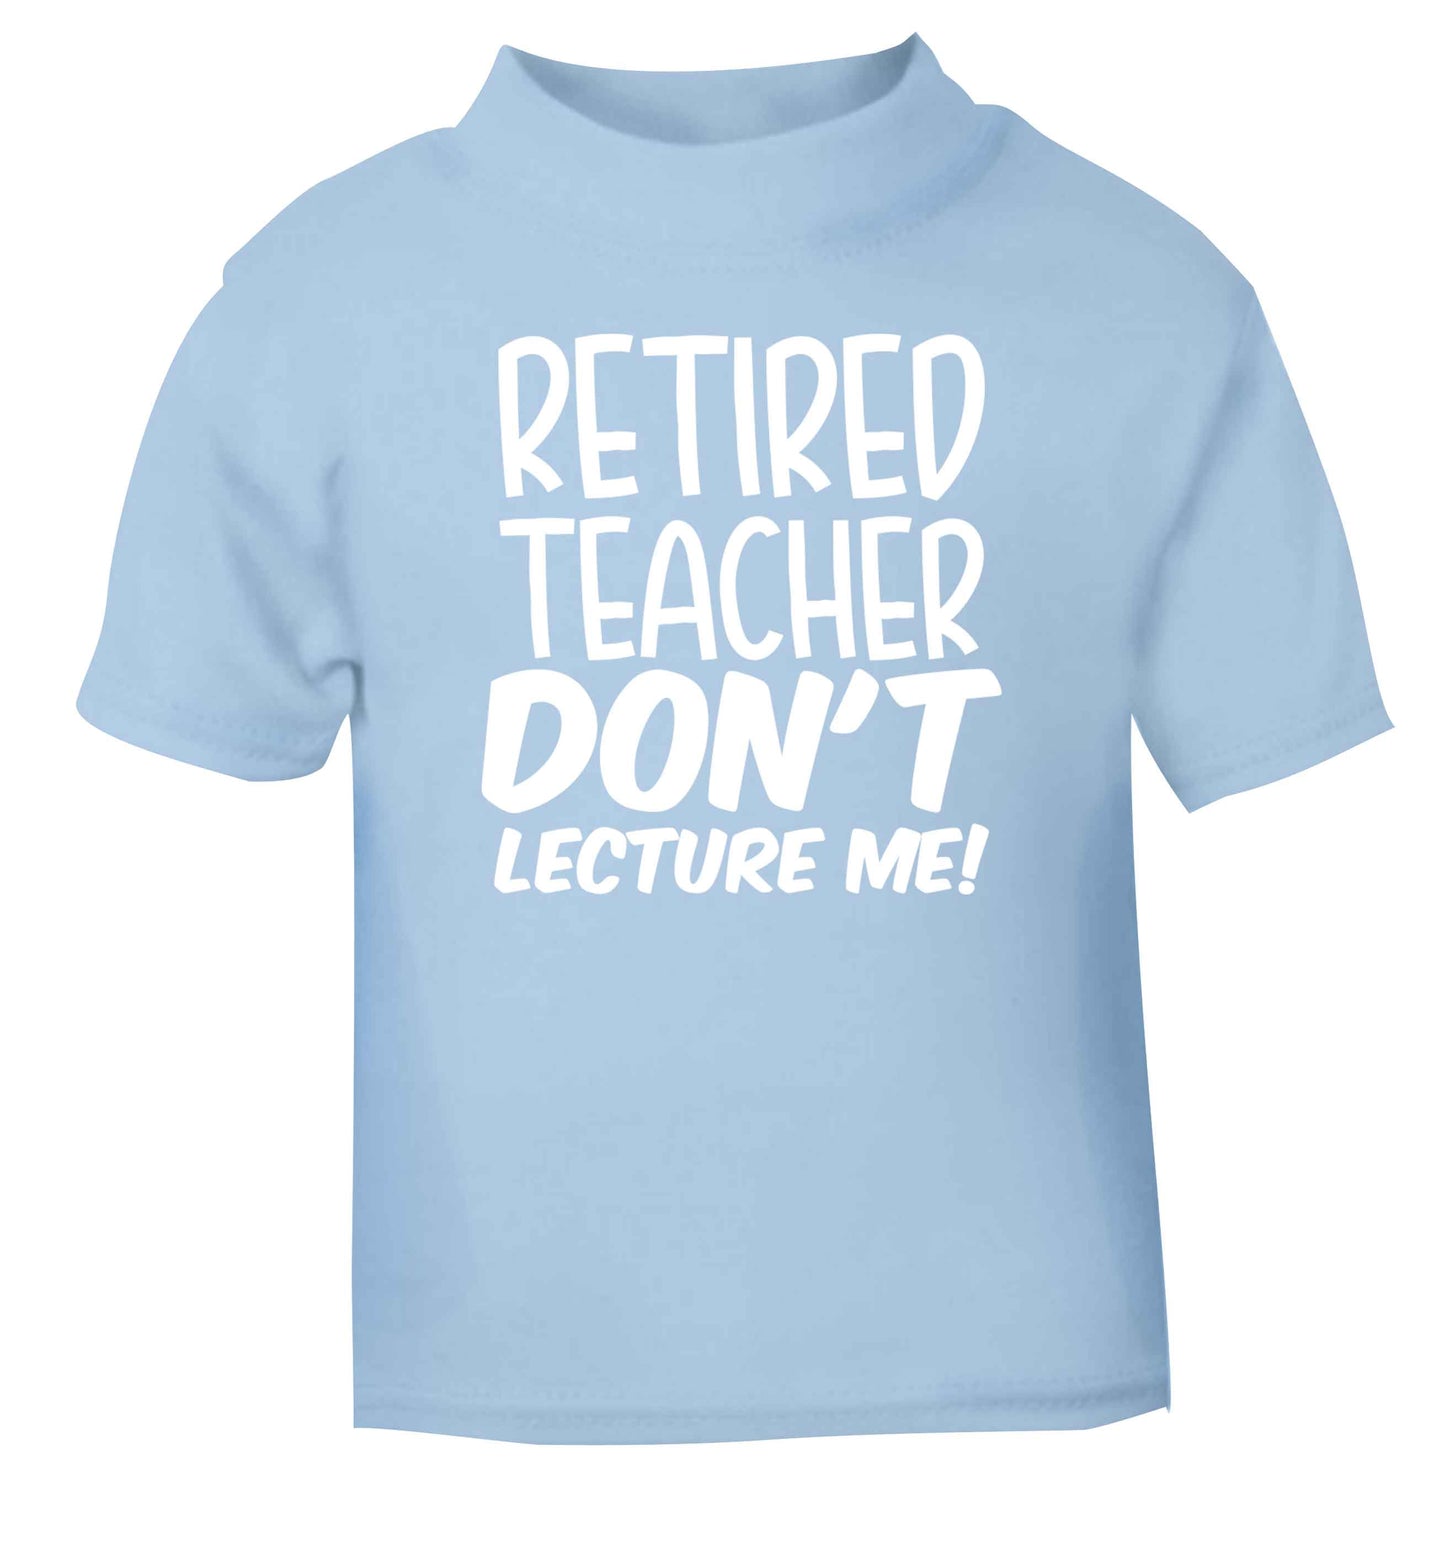 Retired teacher don't lecture me! light blue Baby Toddler Tshirt 2 Years